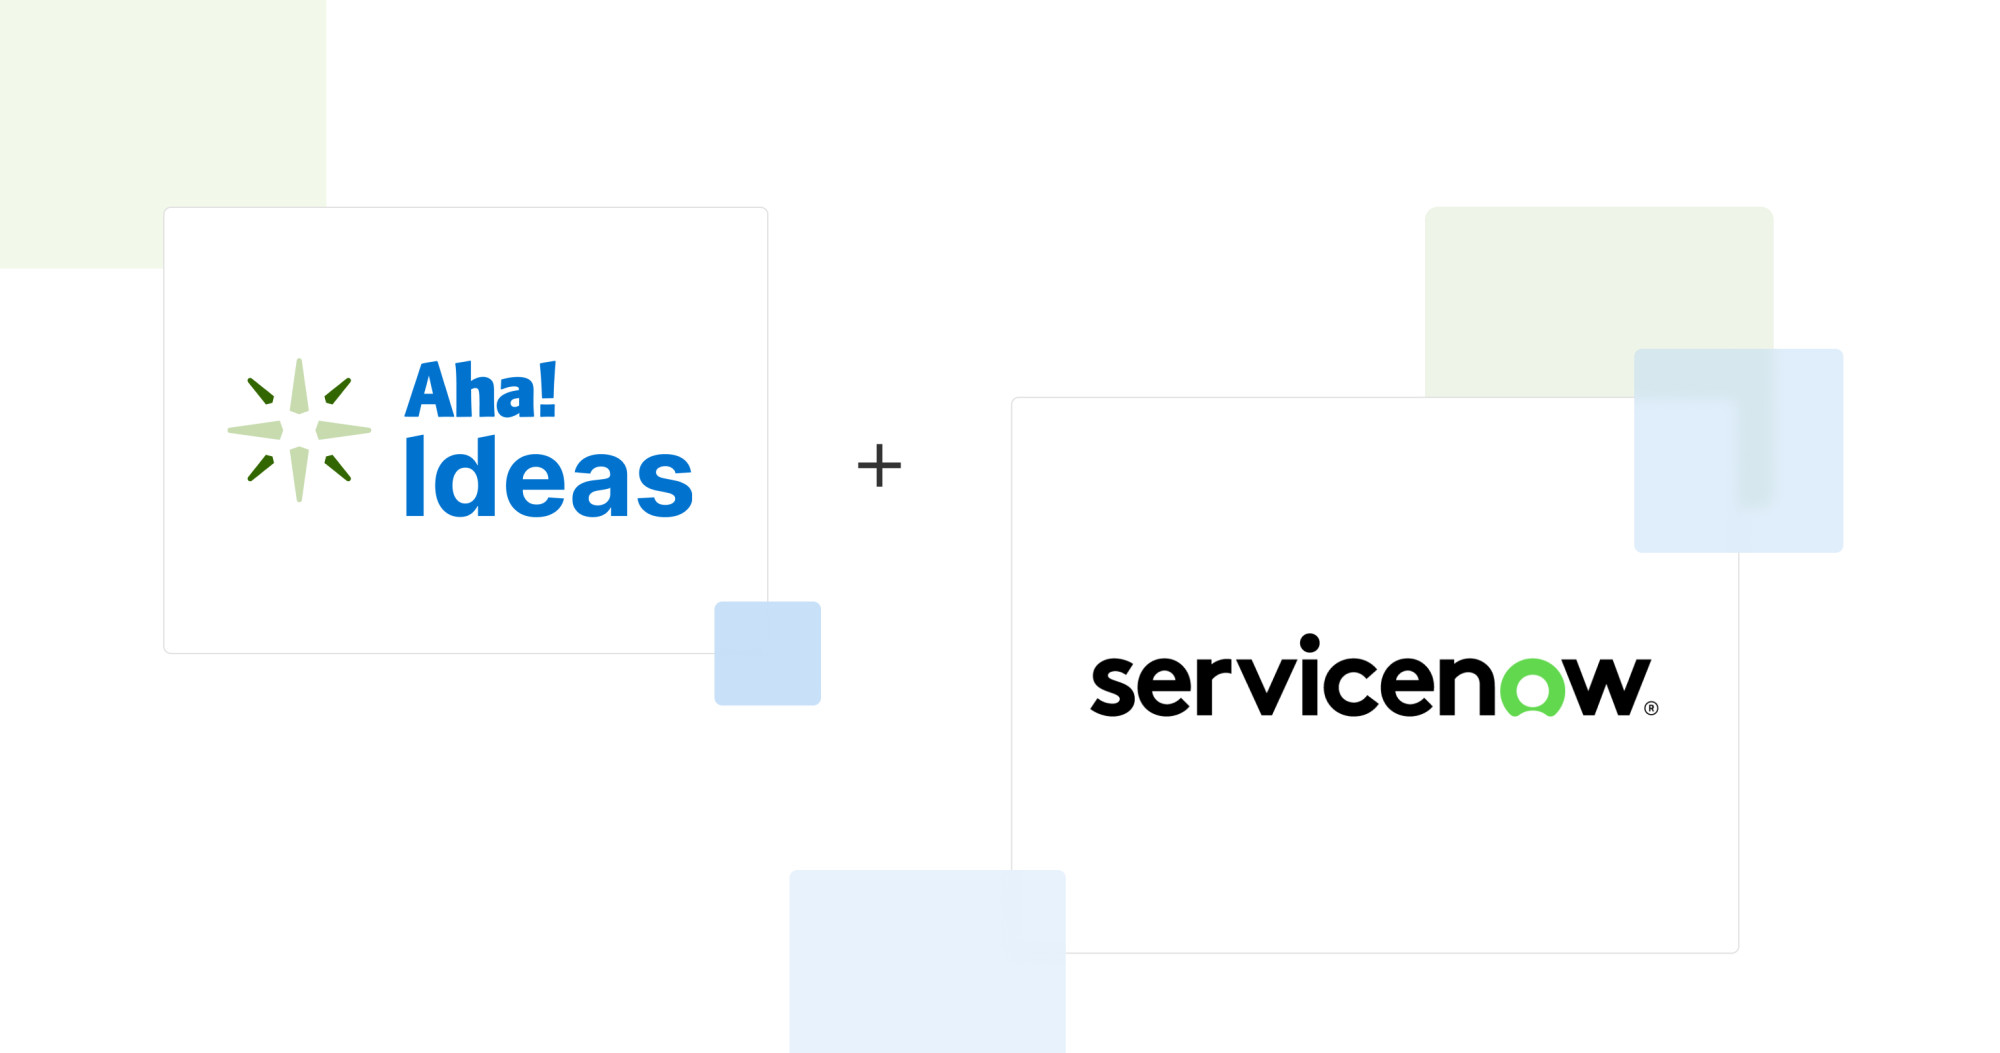 Integrate Aha! Ideas with ServiceNow